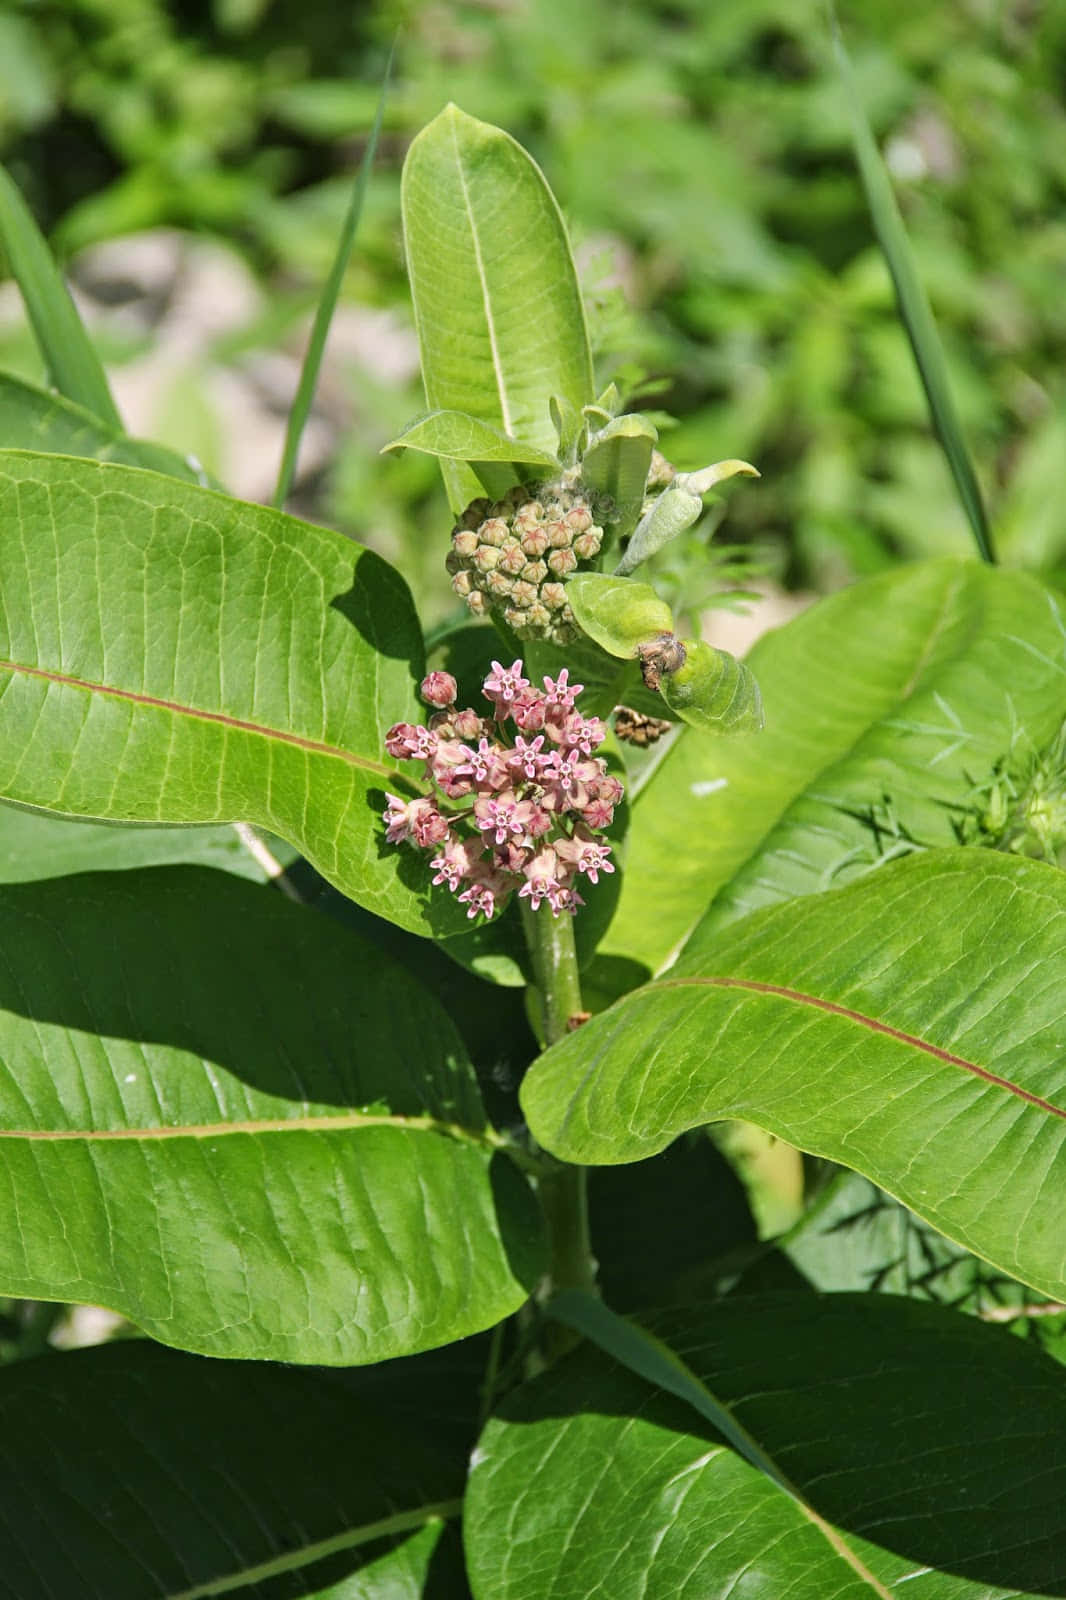 Close-up view of a Milkweed plant